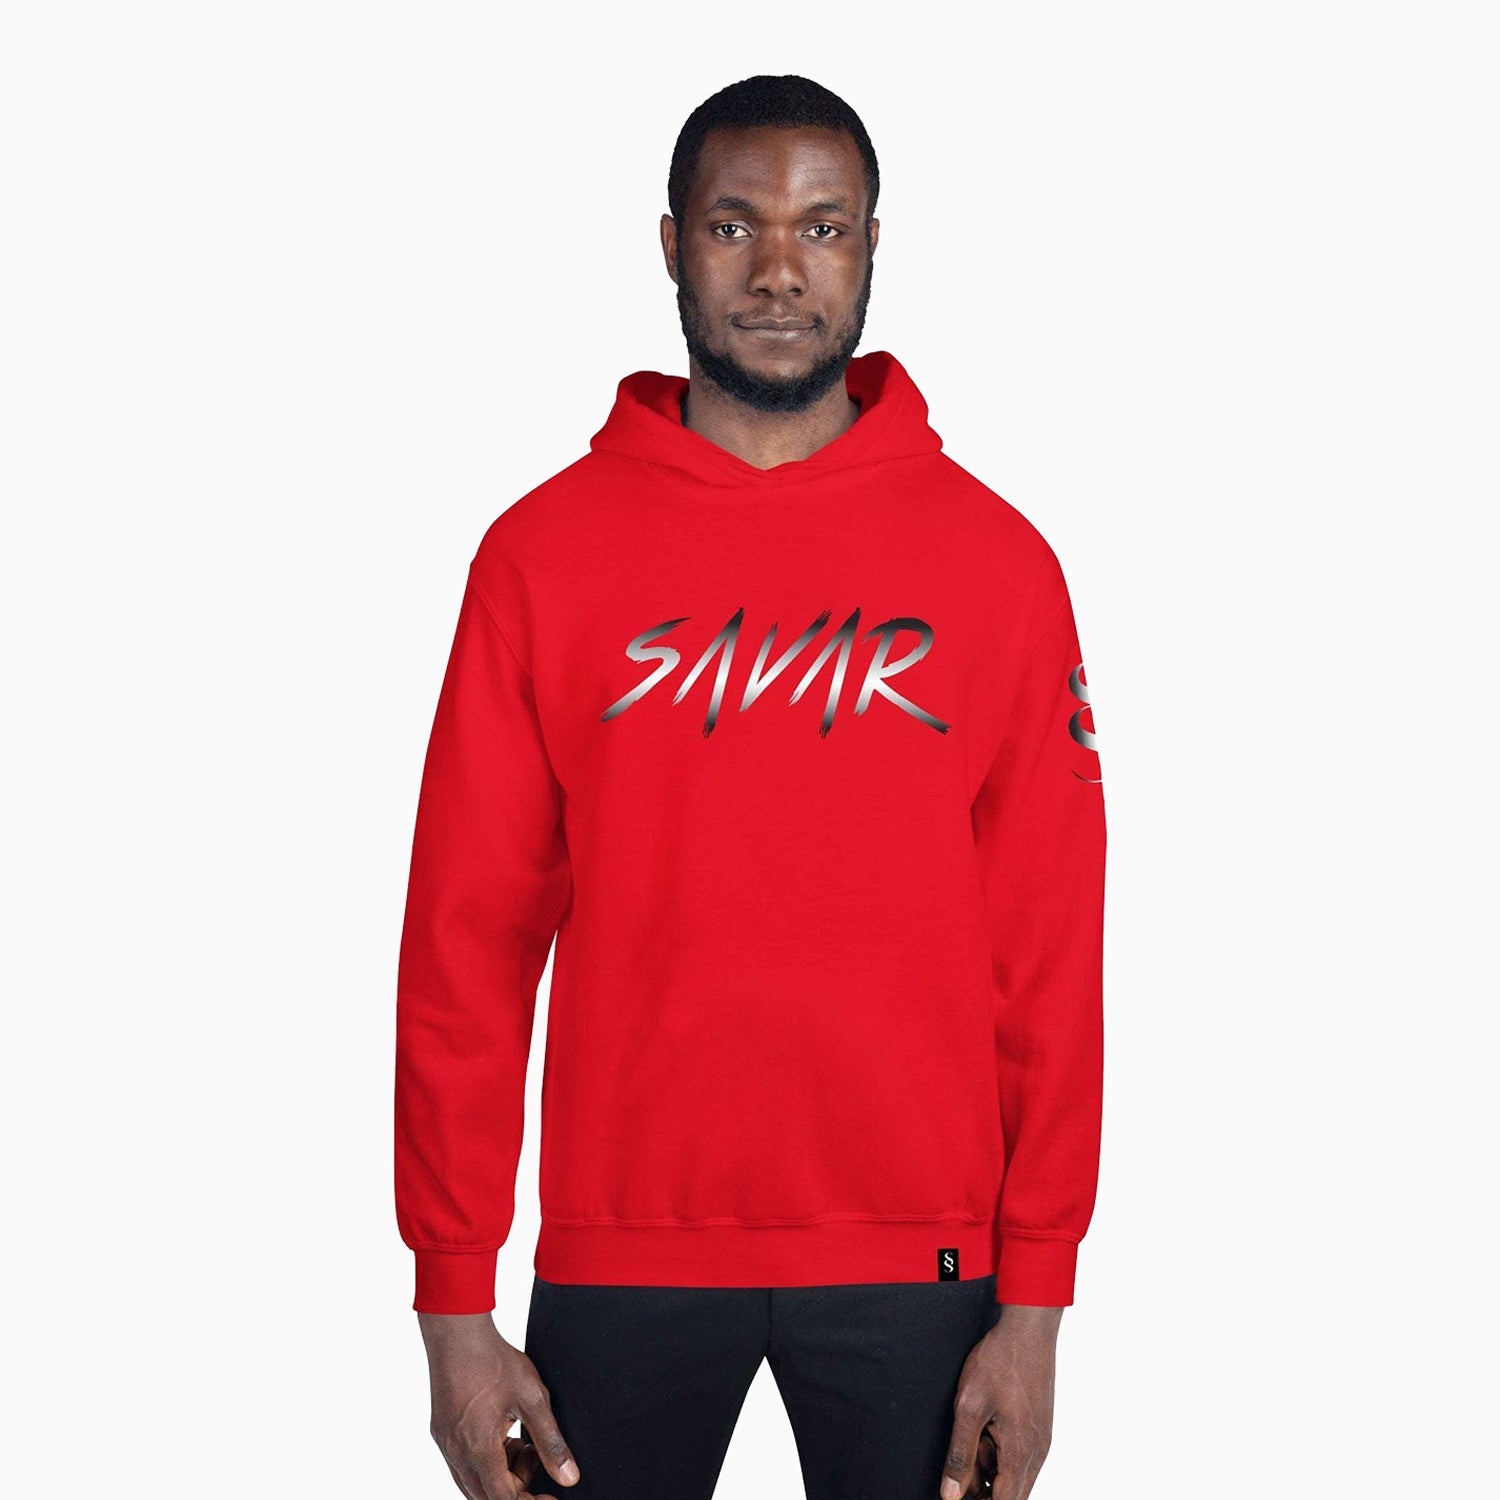 signature-design-printed-pull-over-red-hoodie-for-men-sh111-657